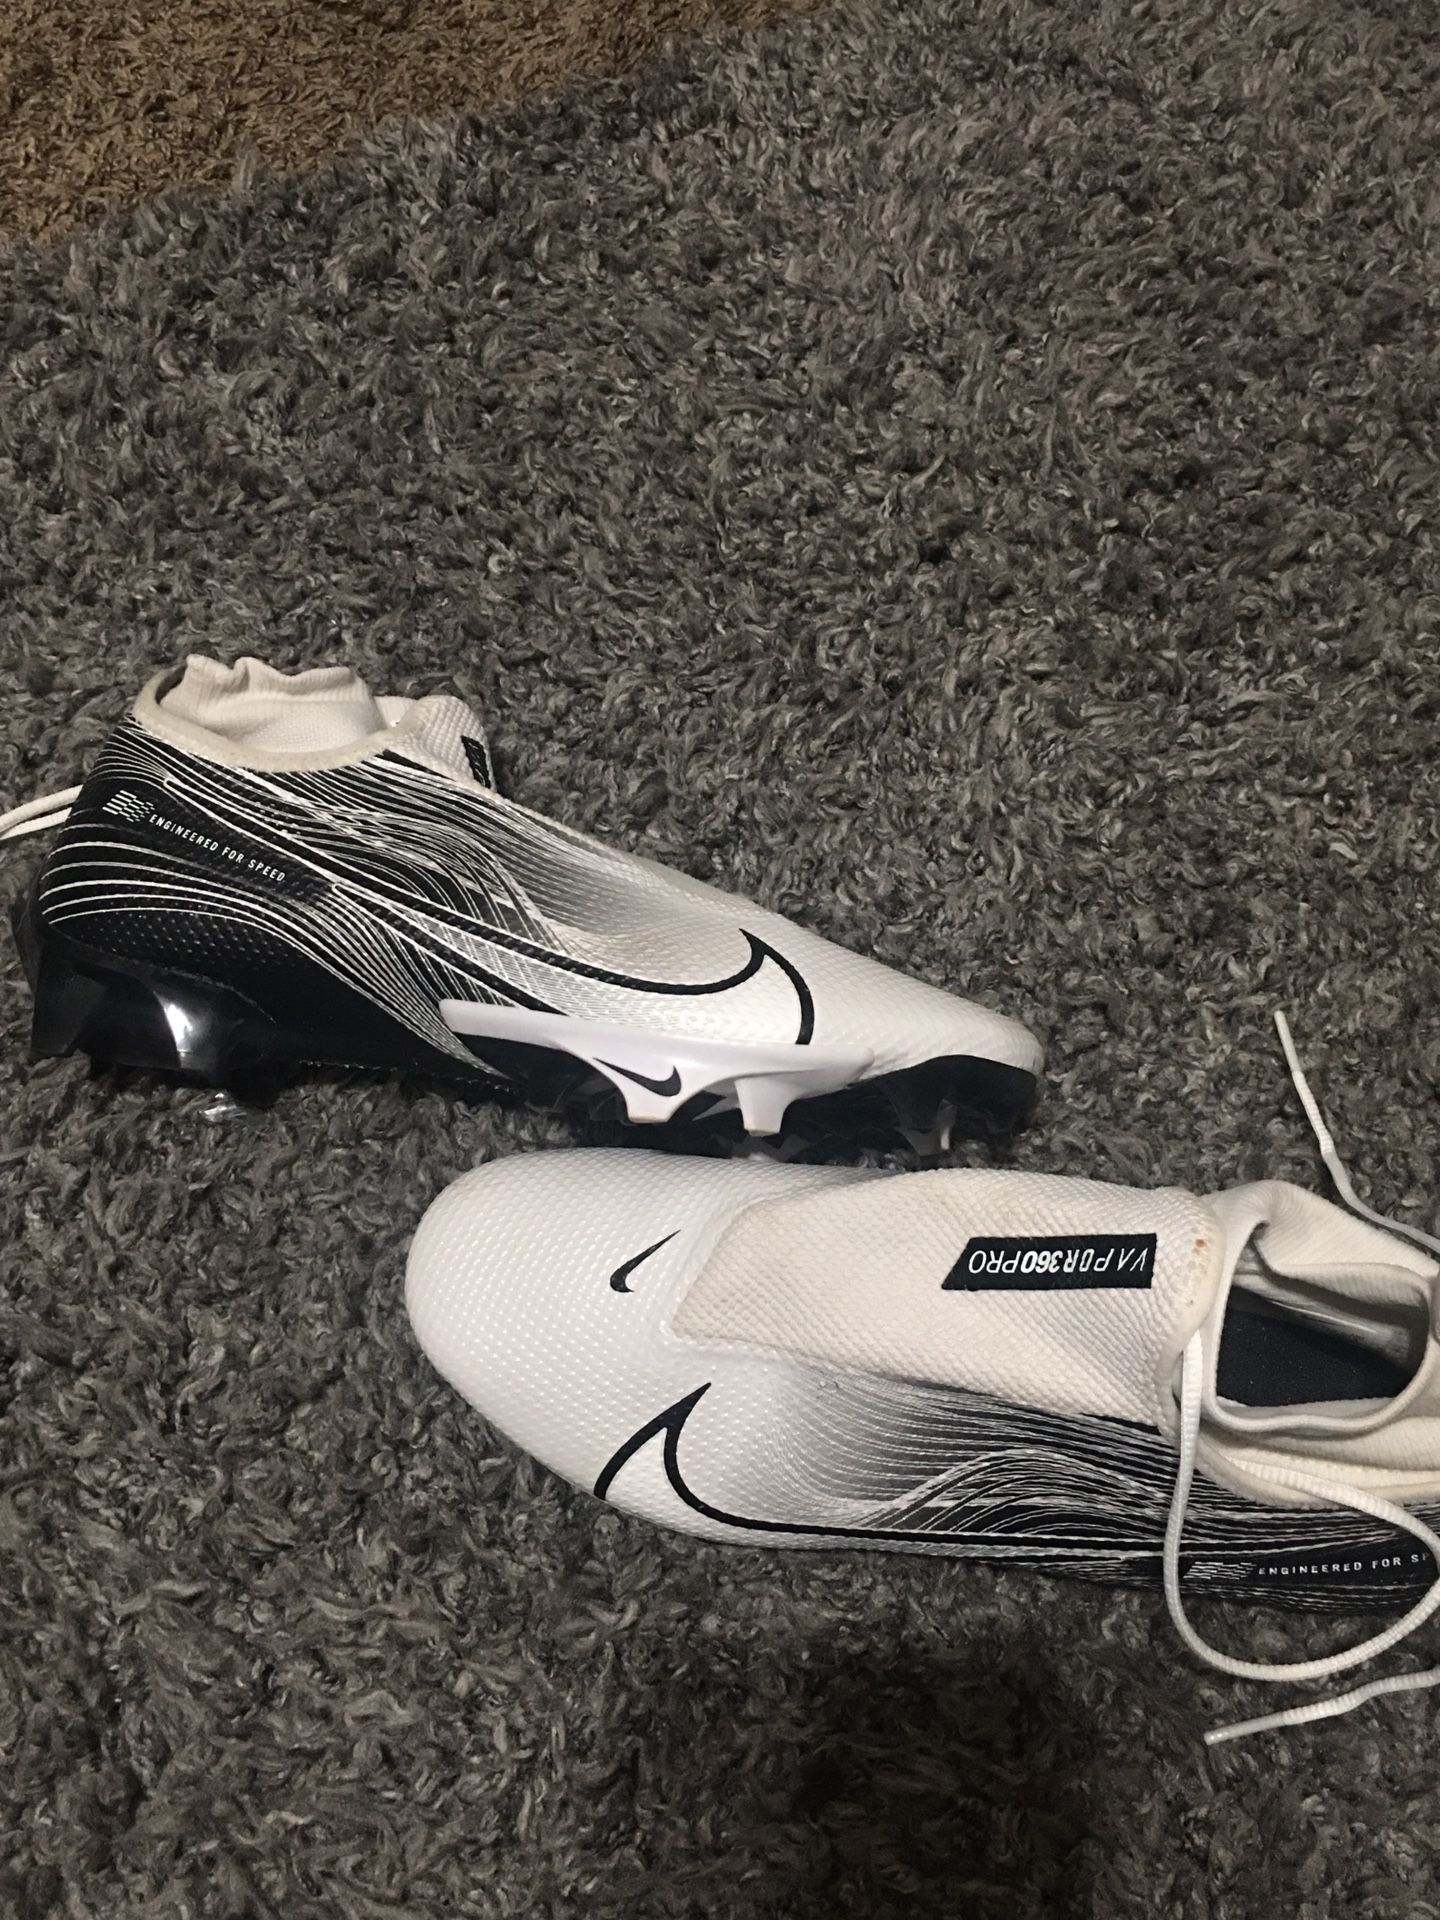 Nike Off White Football Cleats for Sale in Seattle, WA - OfferUp